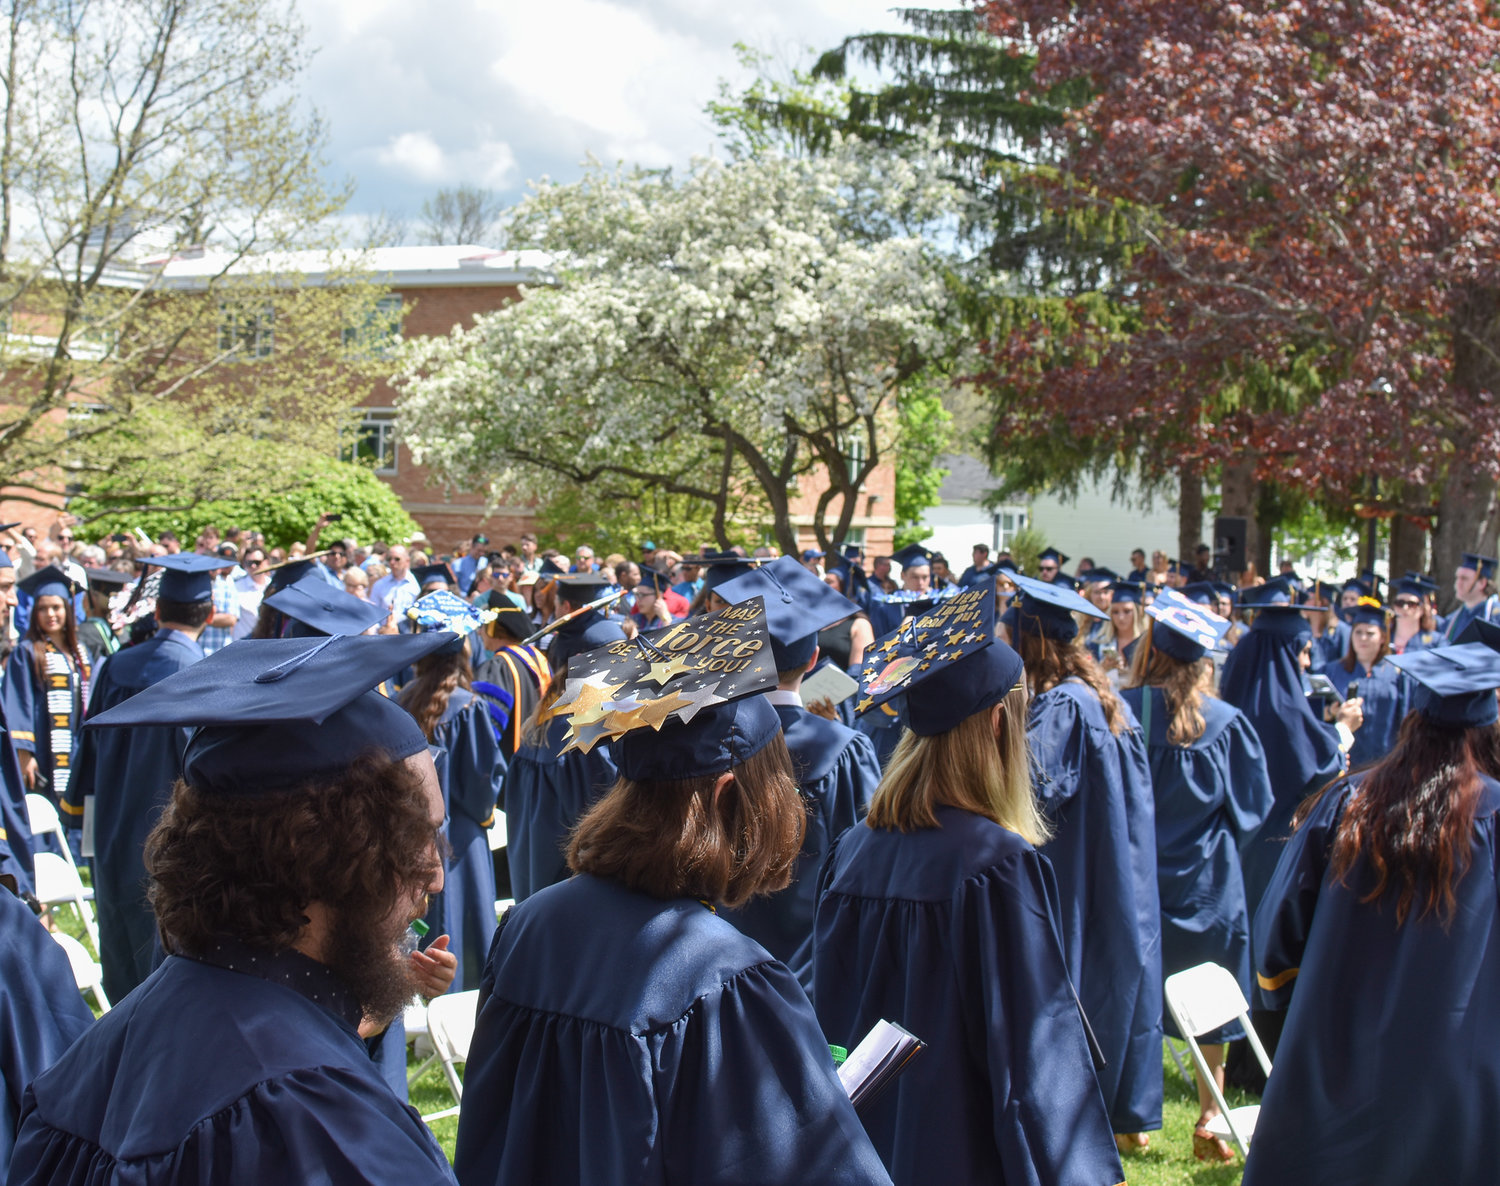 Trees on campus were in full bloom as part of the graduates' special day.